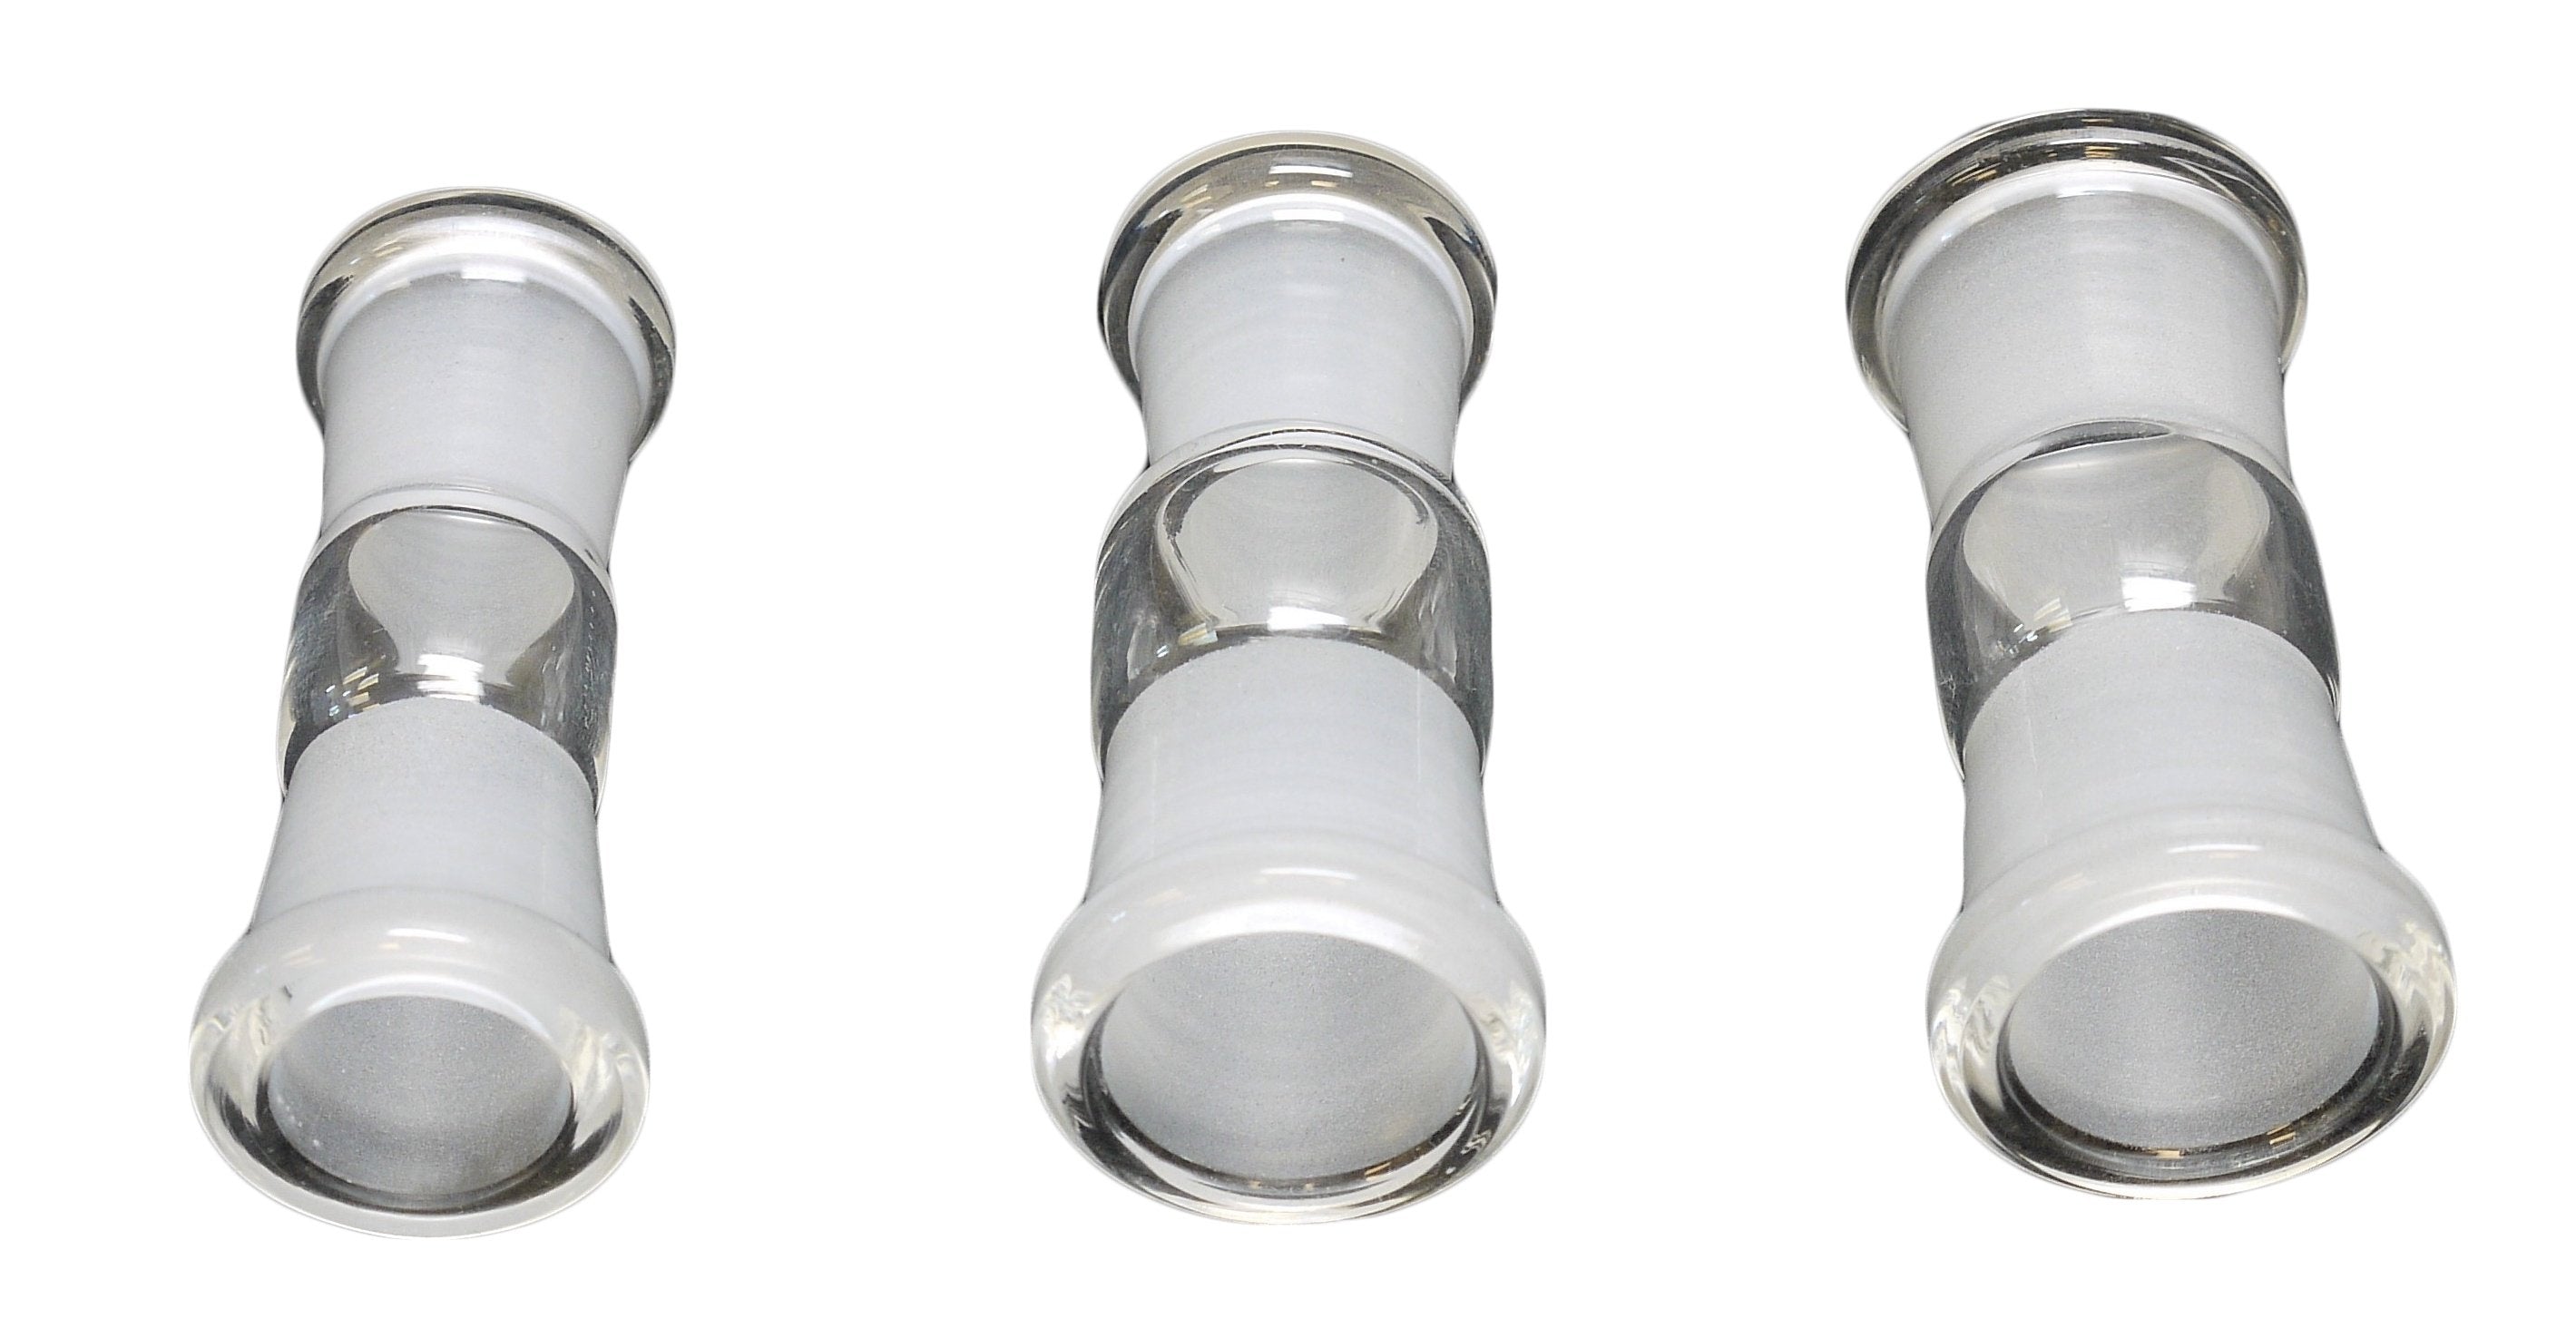 Female to Female connector (19mm to 19mm)